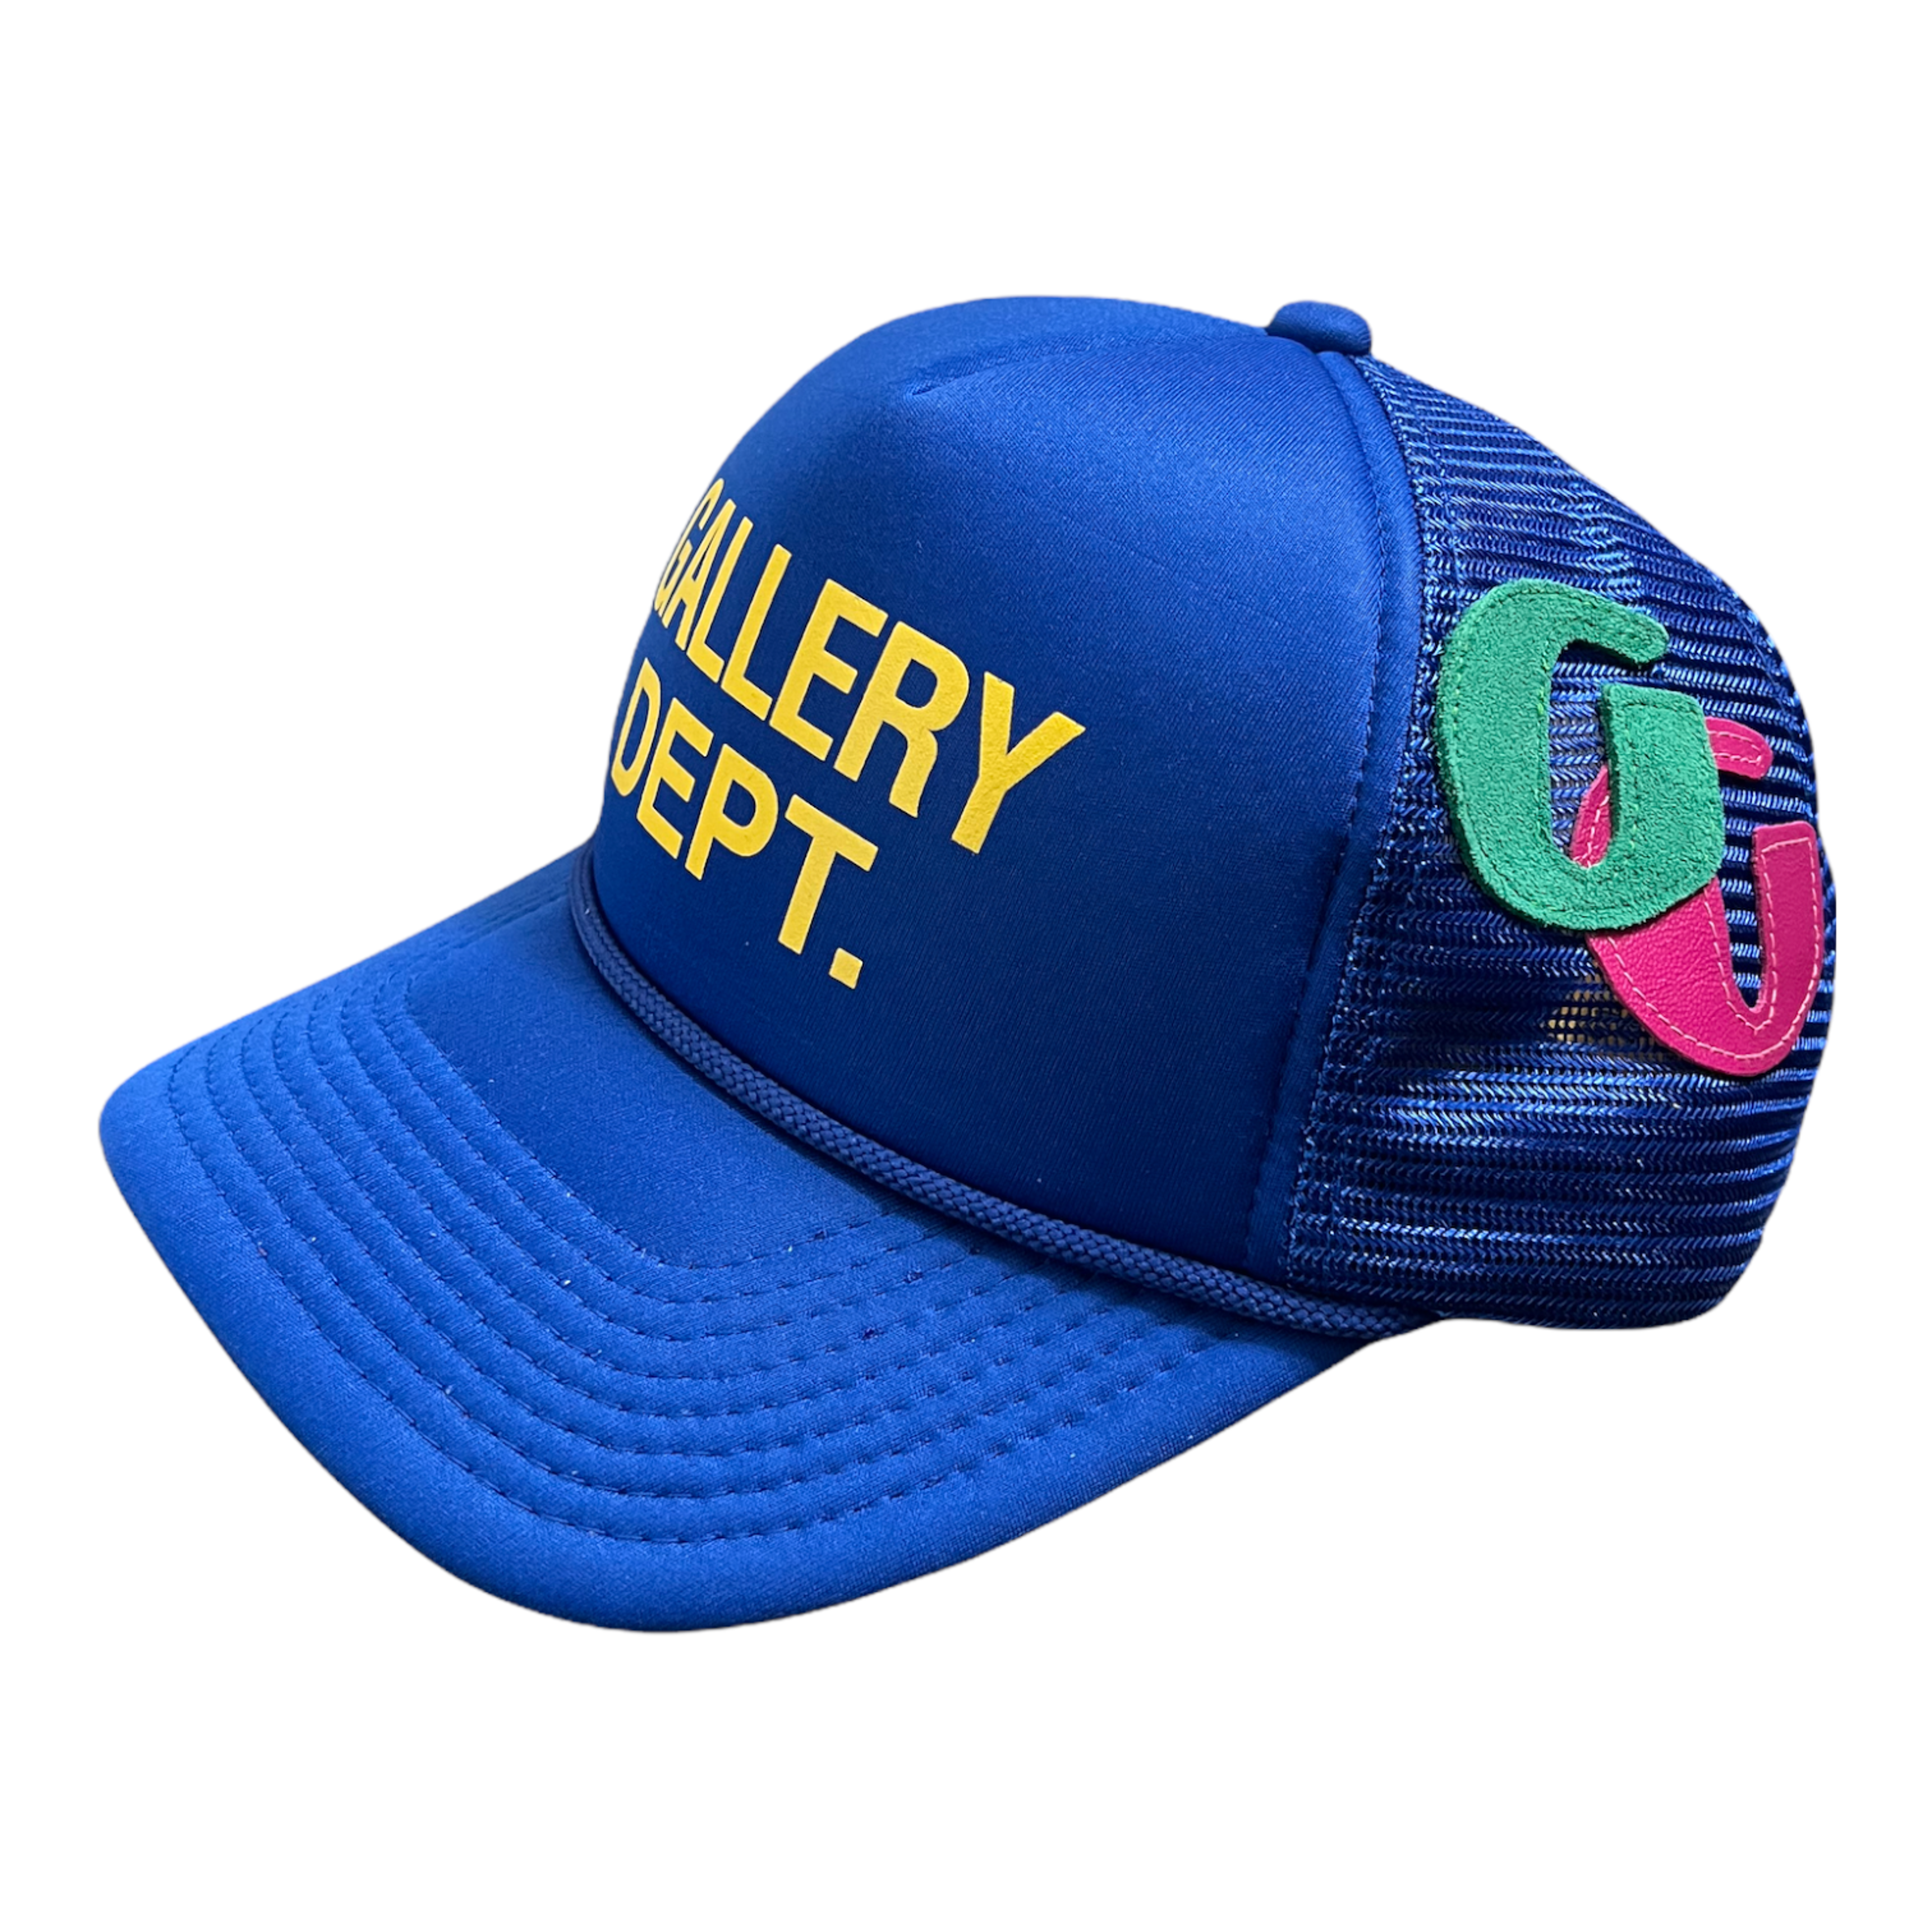 Alternate View 2 of Gallery Department Logo Trucker Hat Blue Yellow (4 G Patch Custo